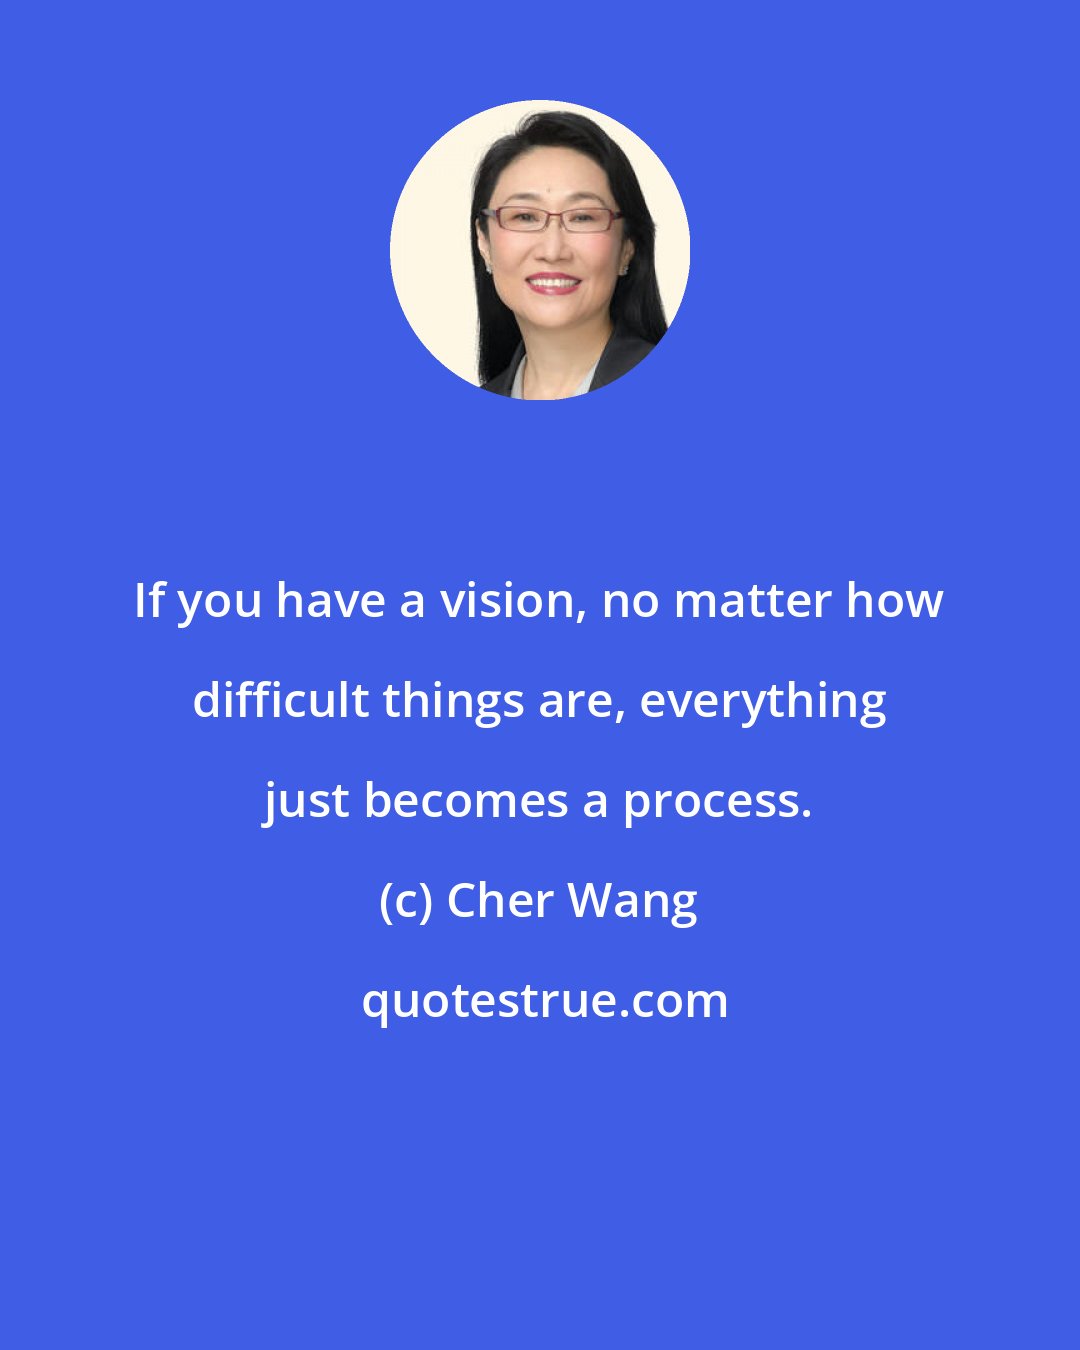 Cher Wang: If you have a vision, no matter how difficult things are, everything just becomes a process.